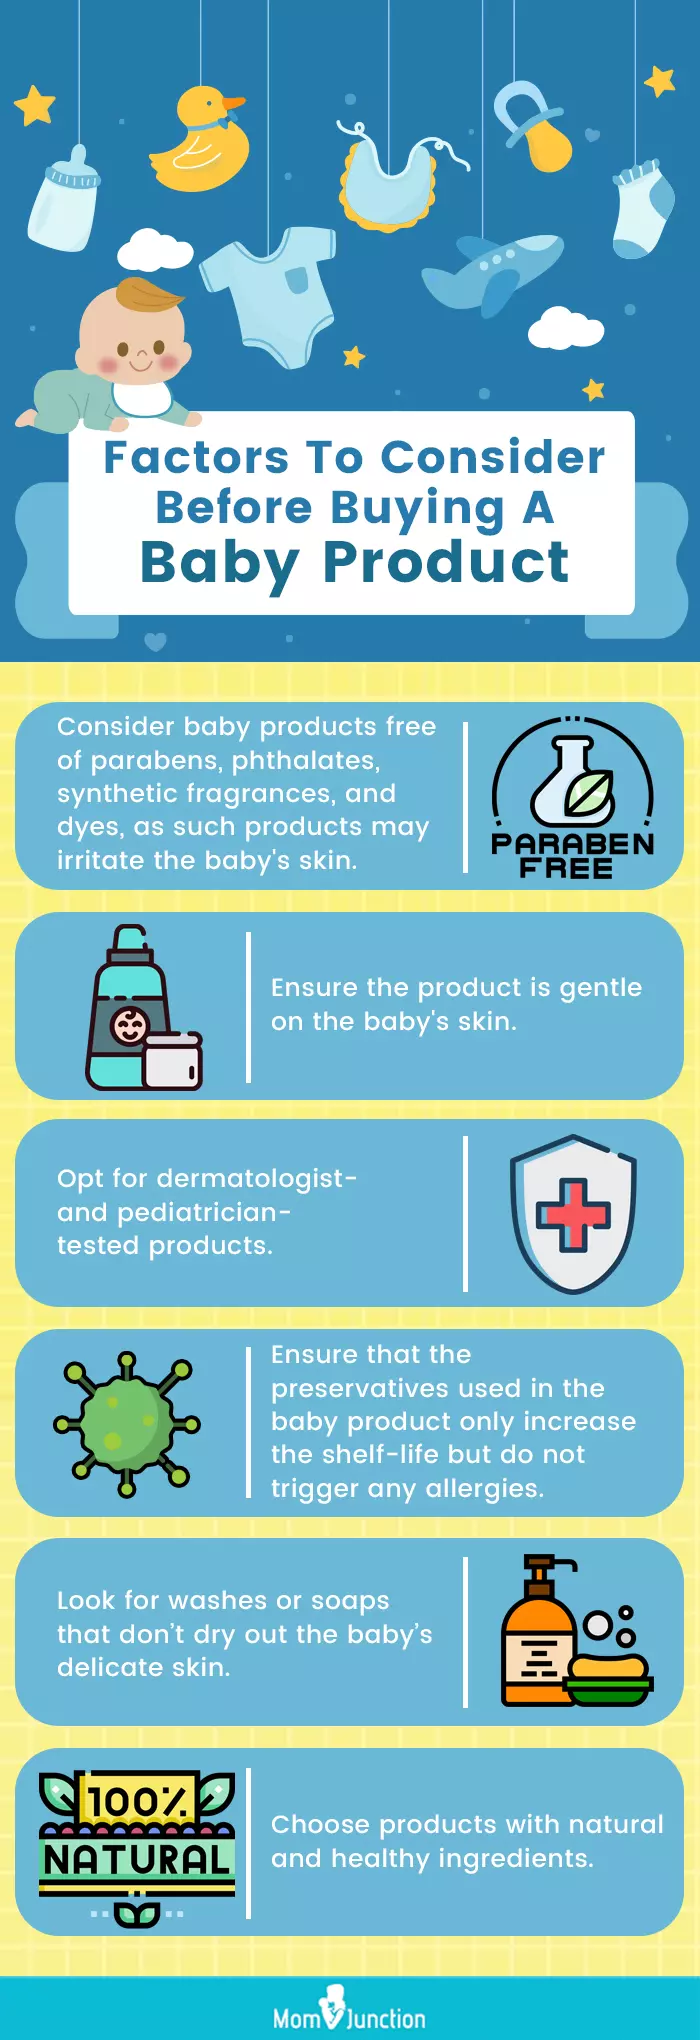 Factors To Consider Before Buying A Baby Product